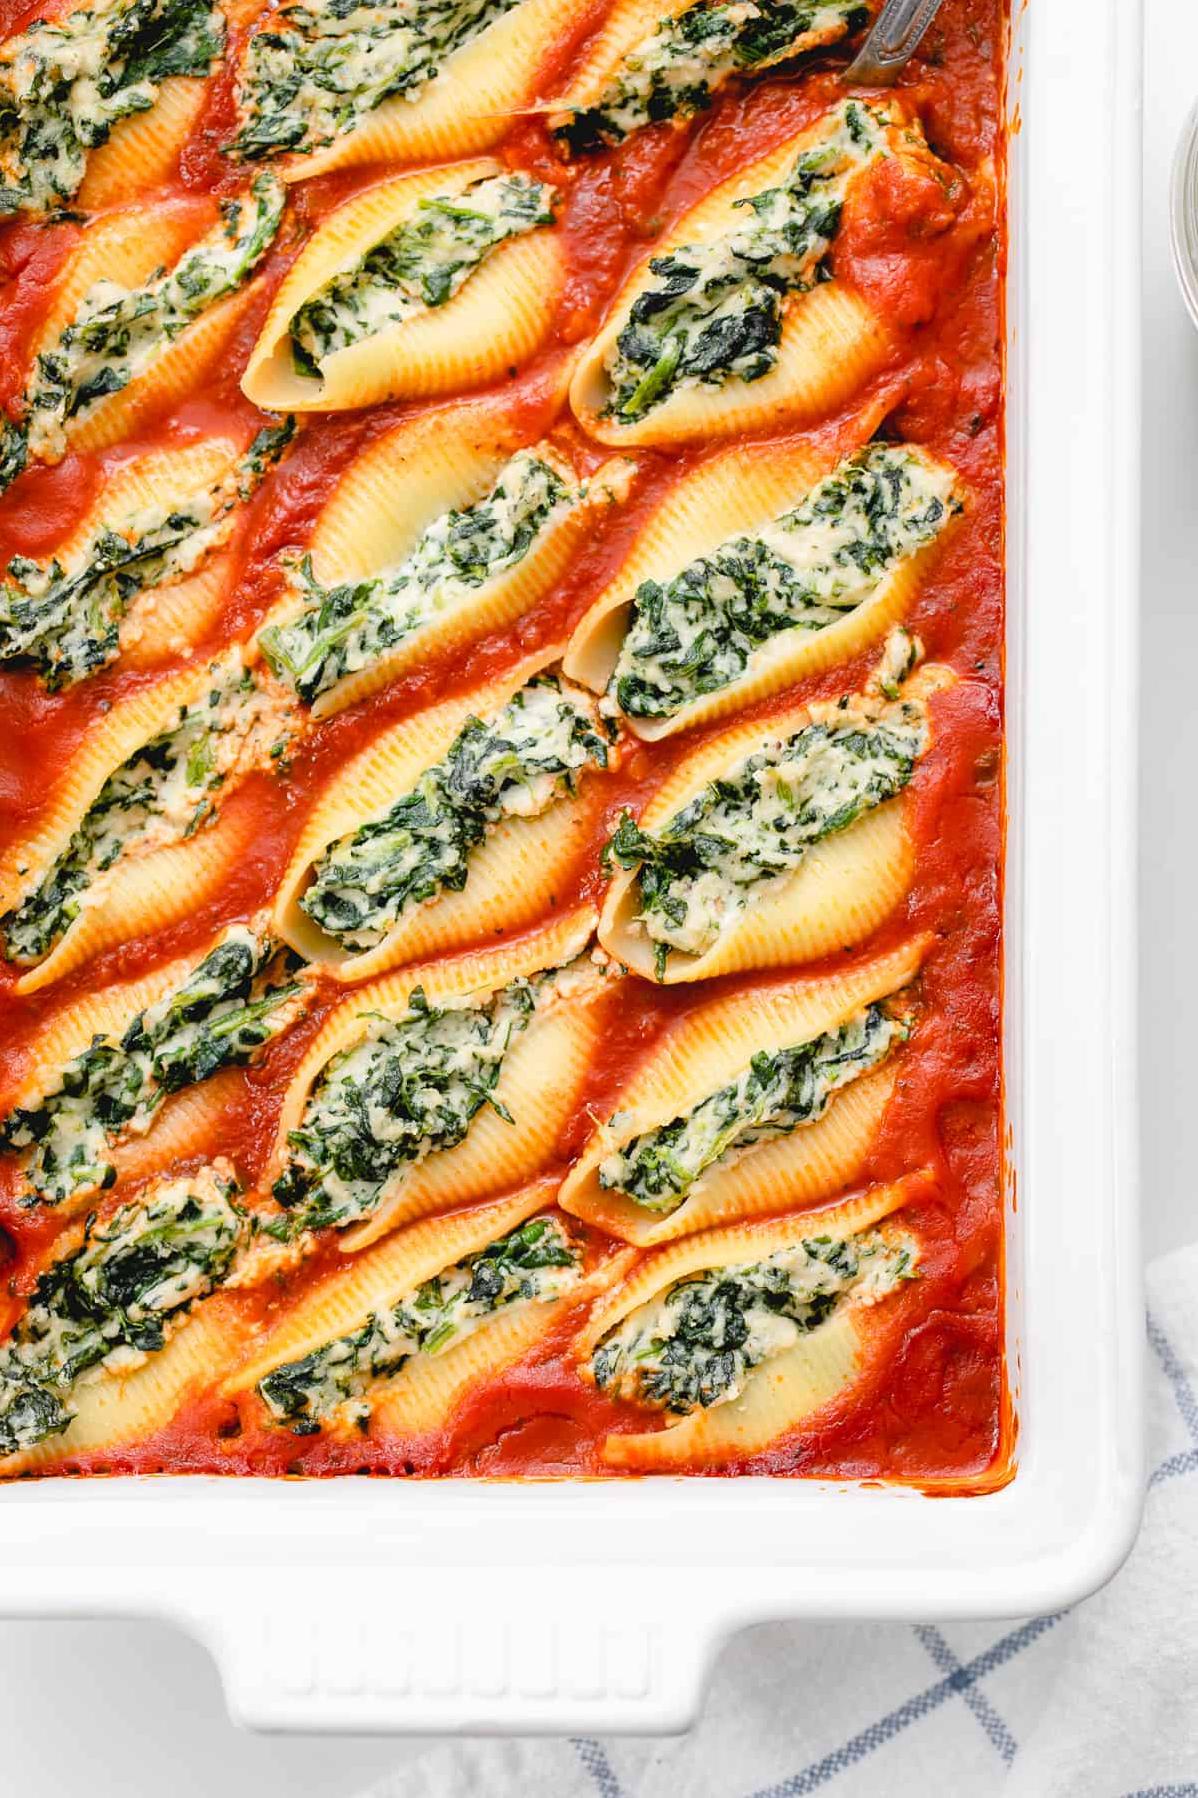  Bold, bright, and beautiful – these vegan stuffed shells are sure to please the eye as well as the palate.